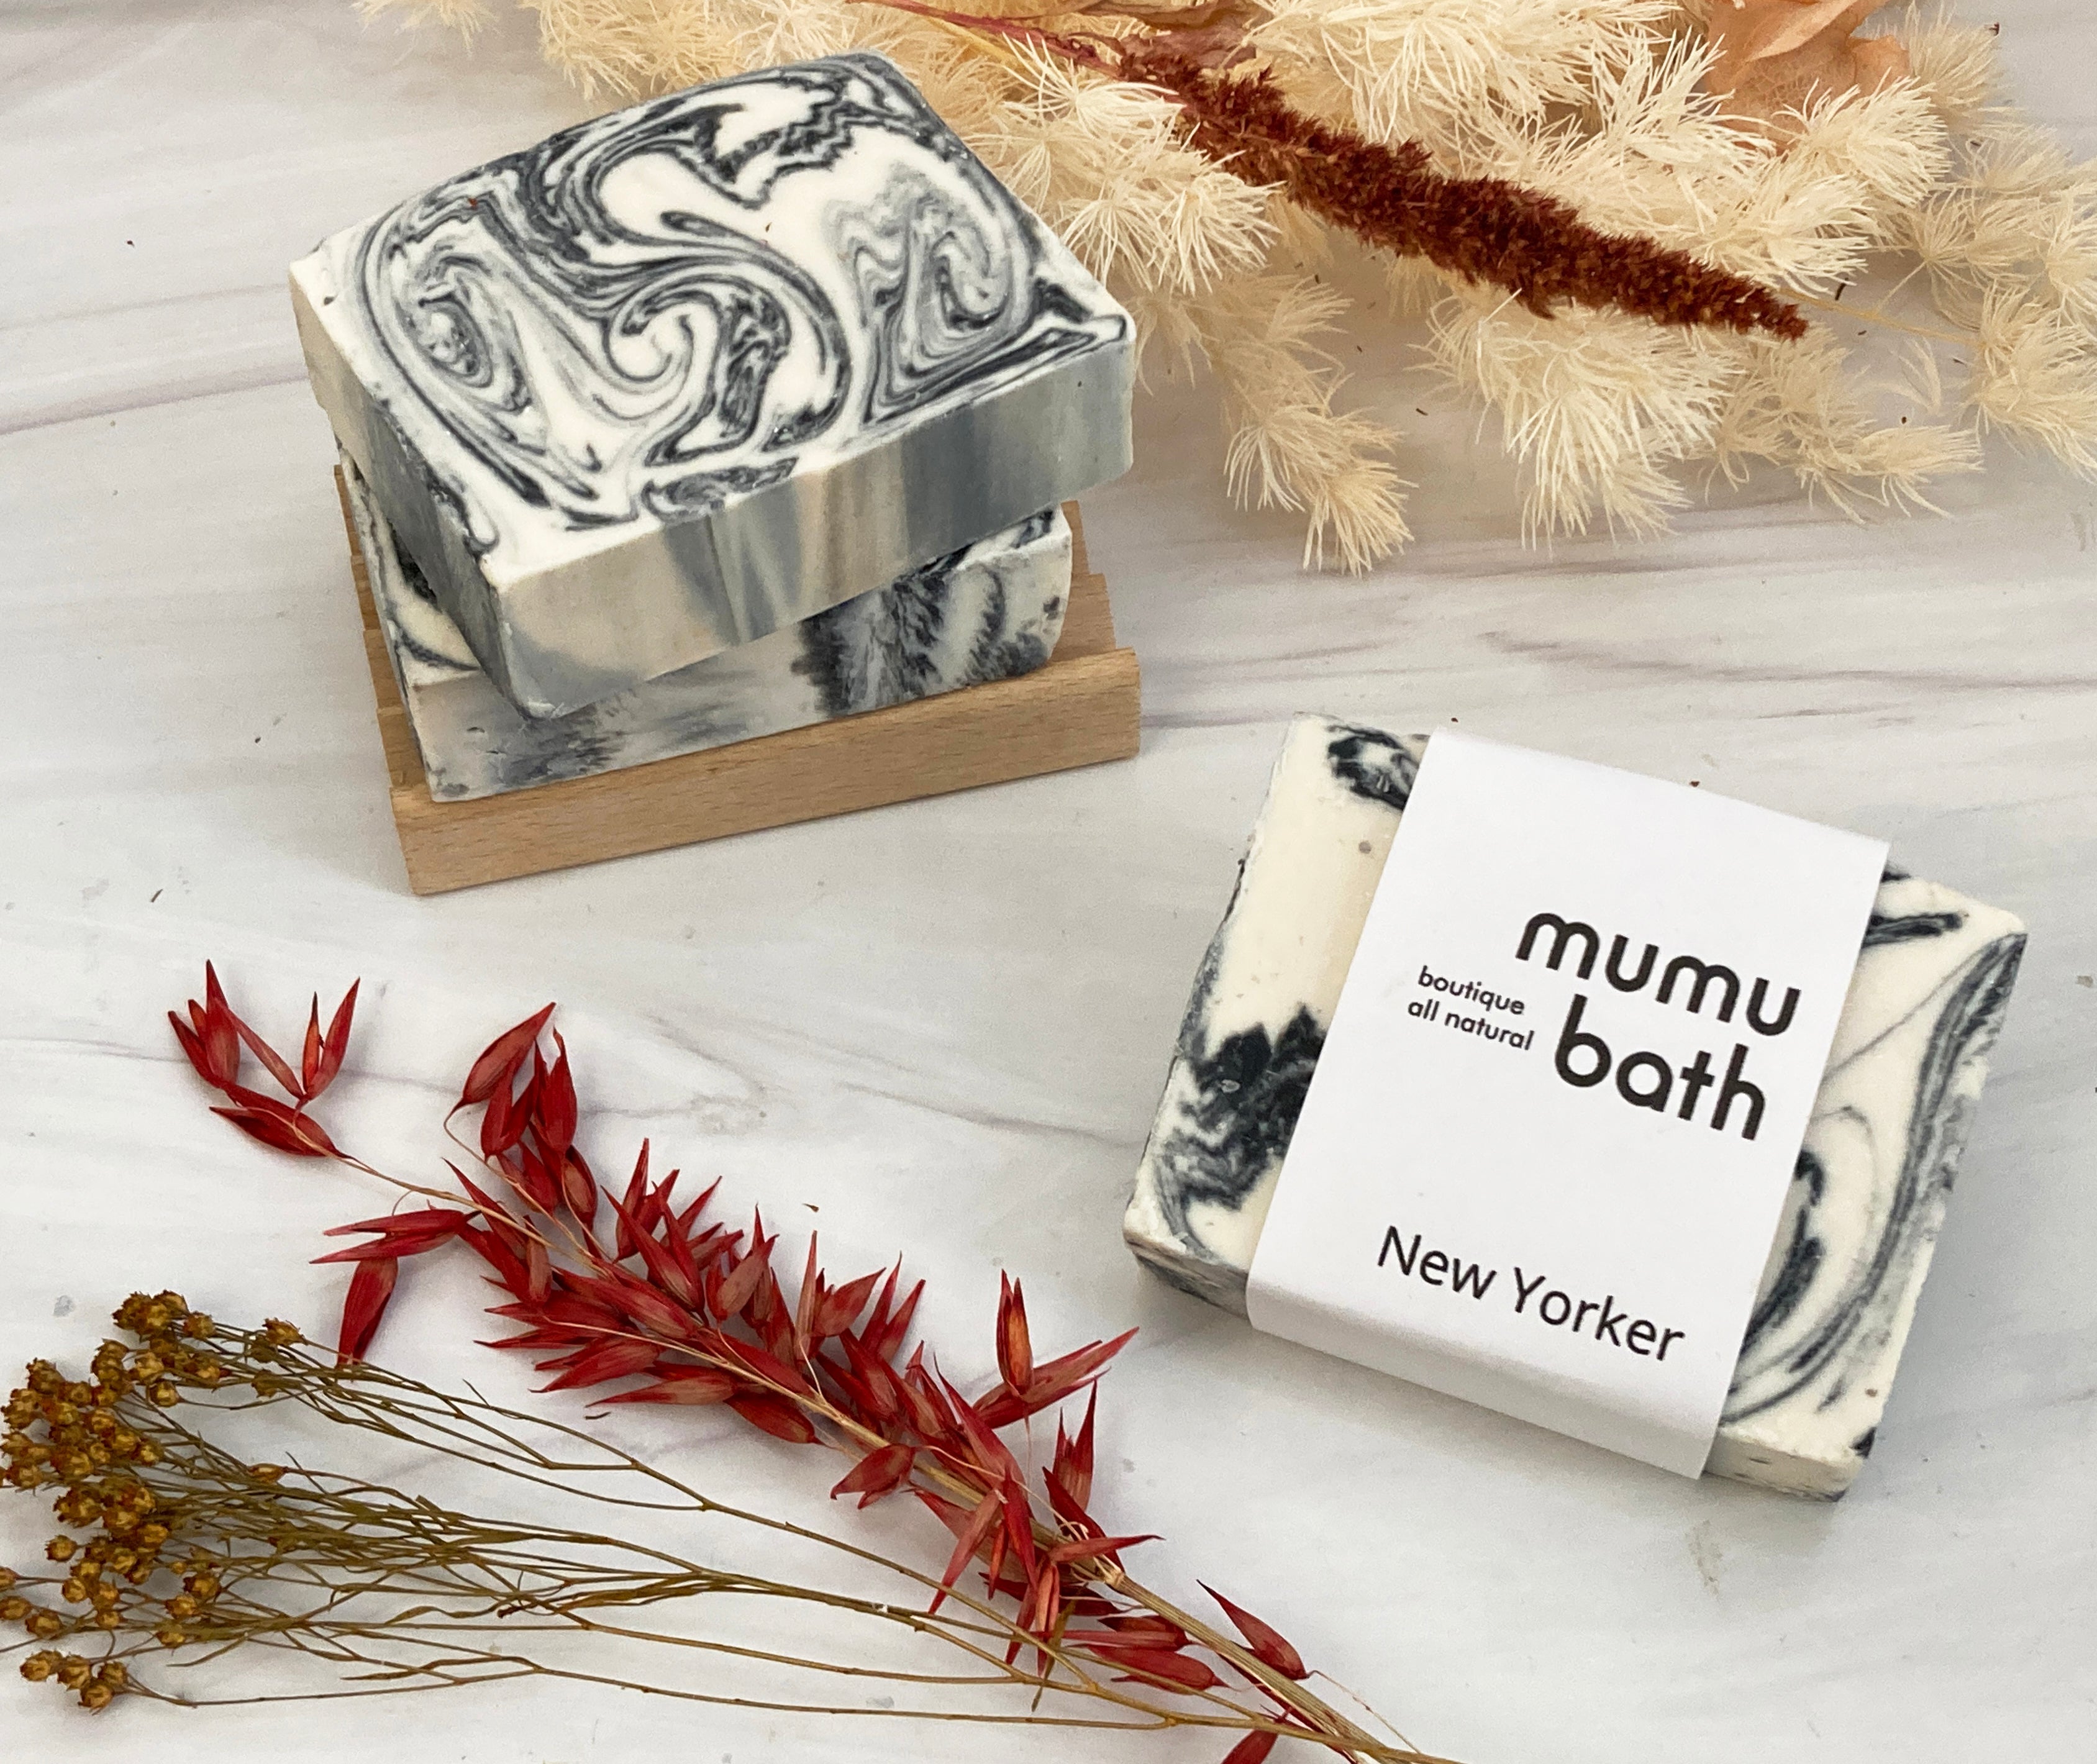 A close-up of the soap bar, showing the black and white color and the Mumu Bath logo.